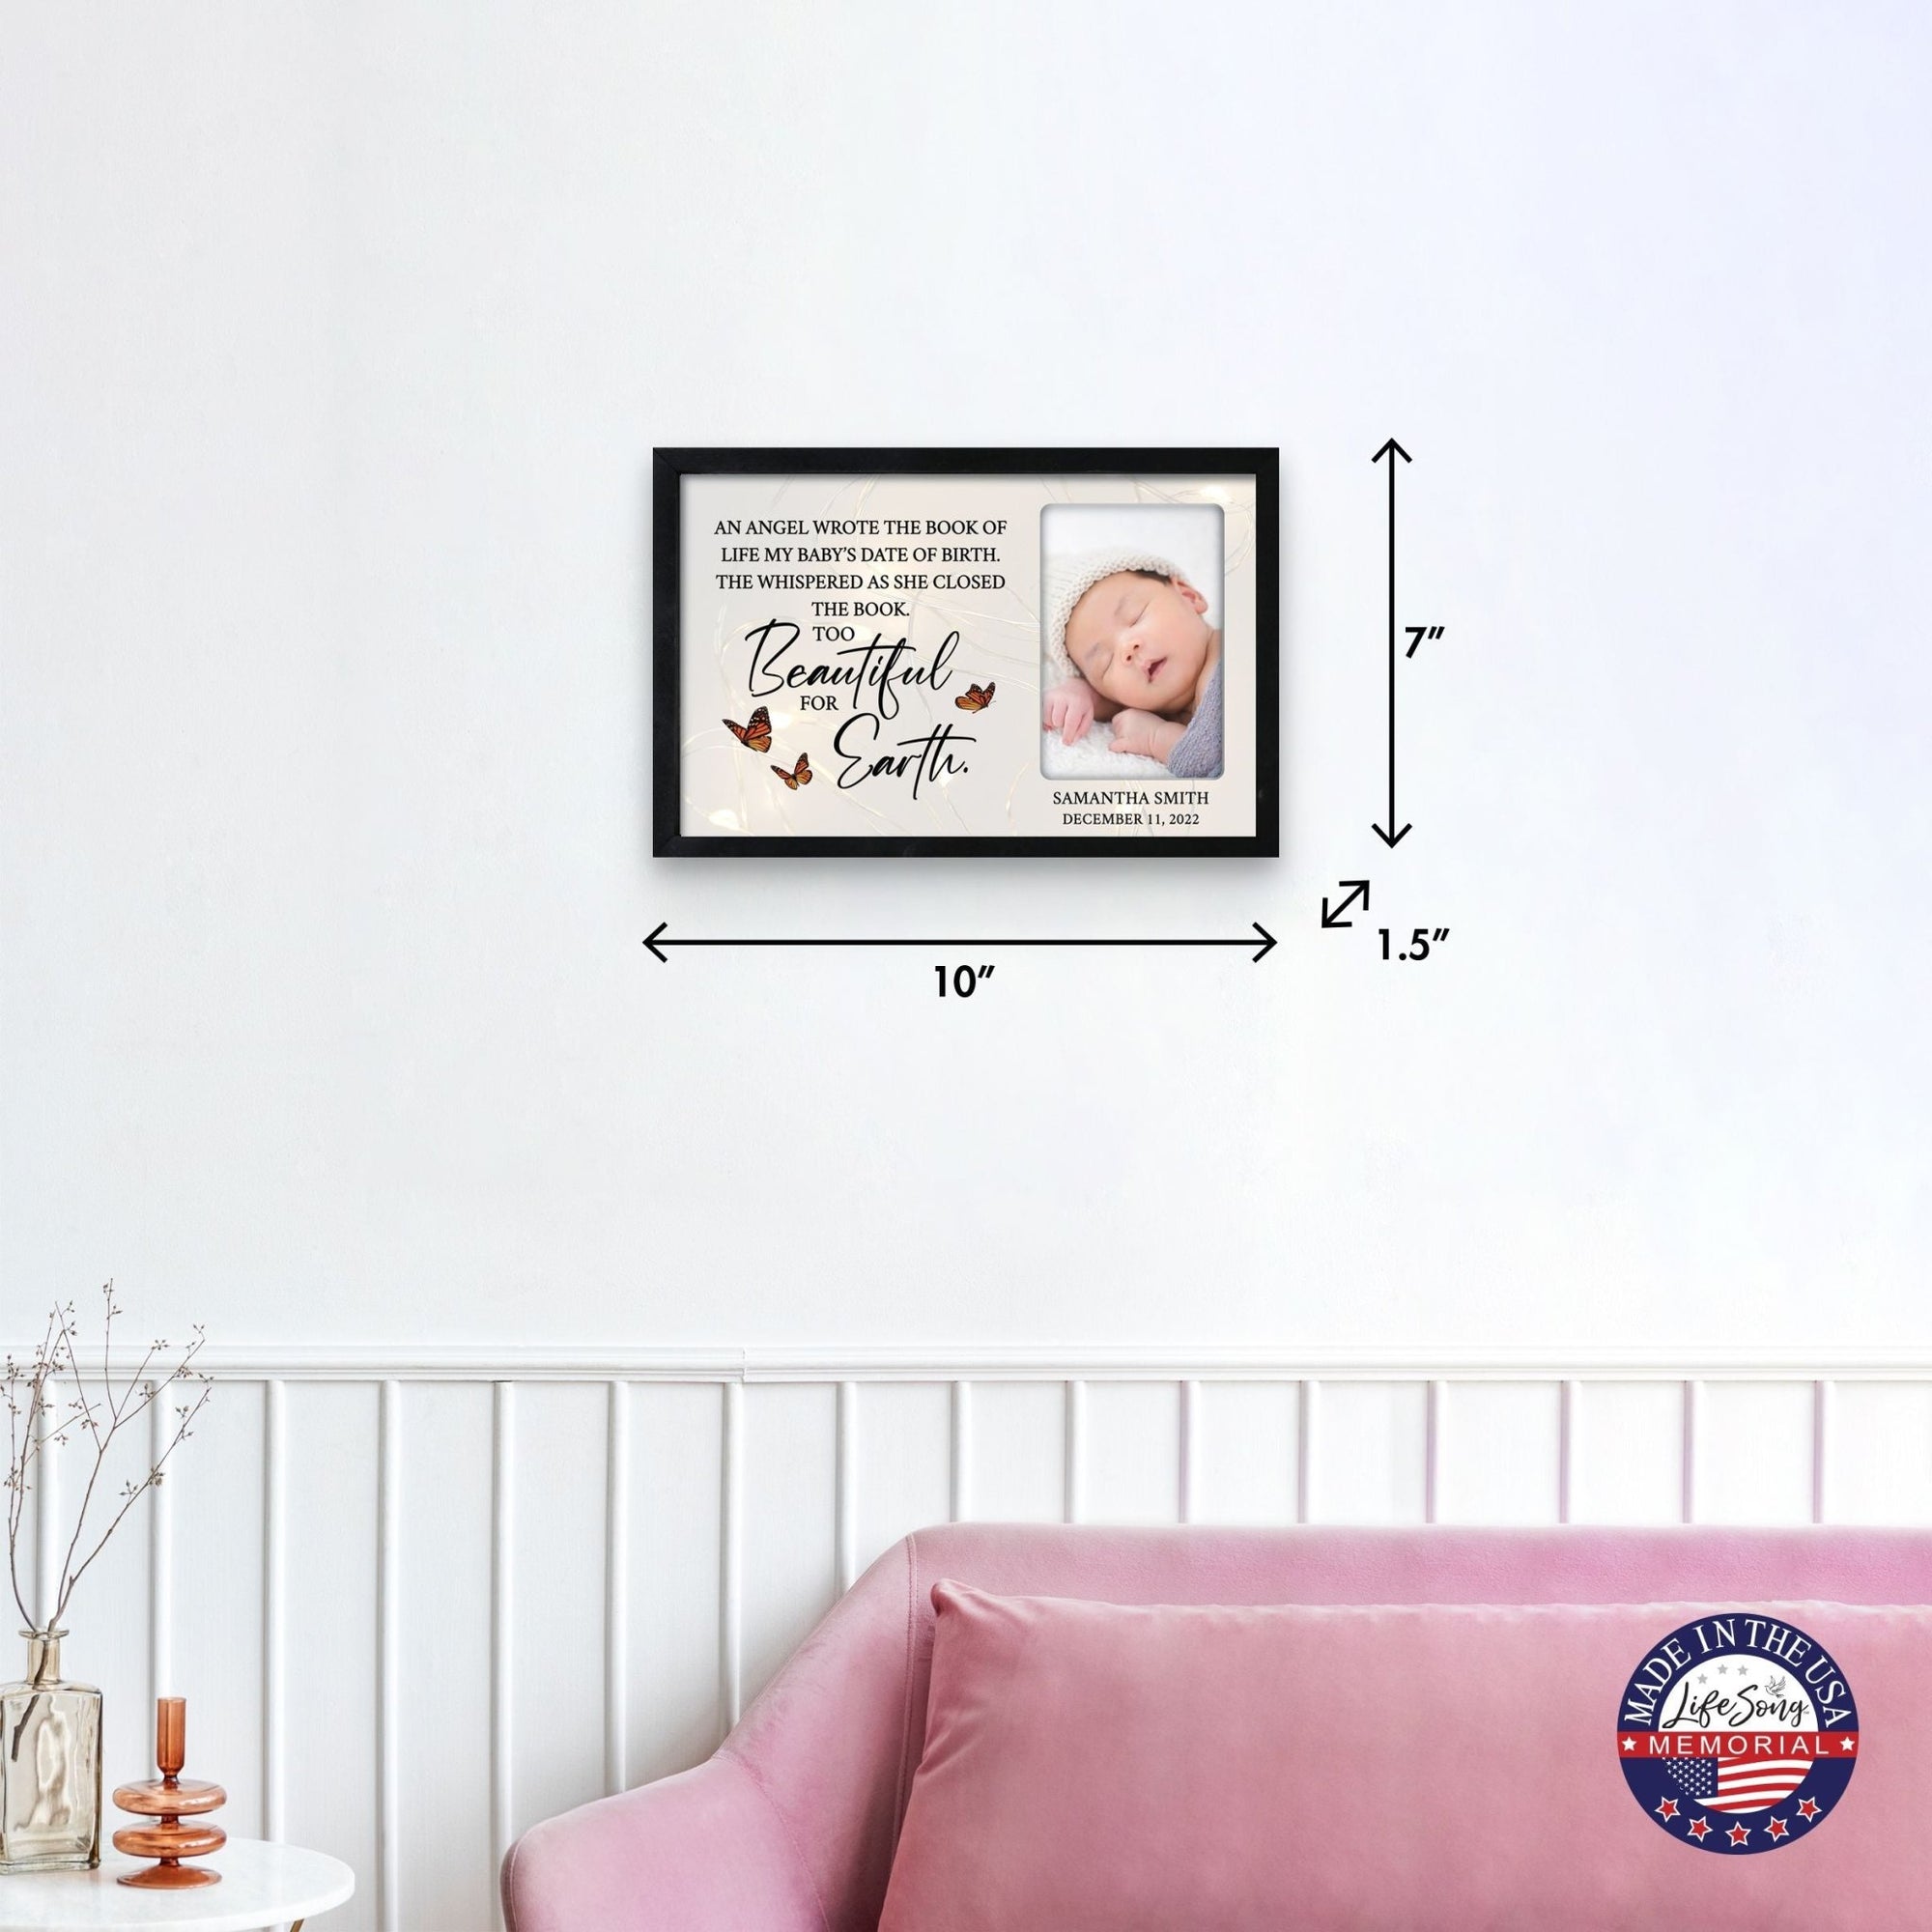 Personalized Memorial Black Framed Shadow Box With Lights Sympathy Gift Wall Décor - An Angel Who Wrote The Book - LifeSong Milestones